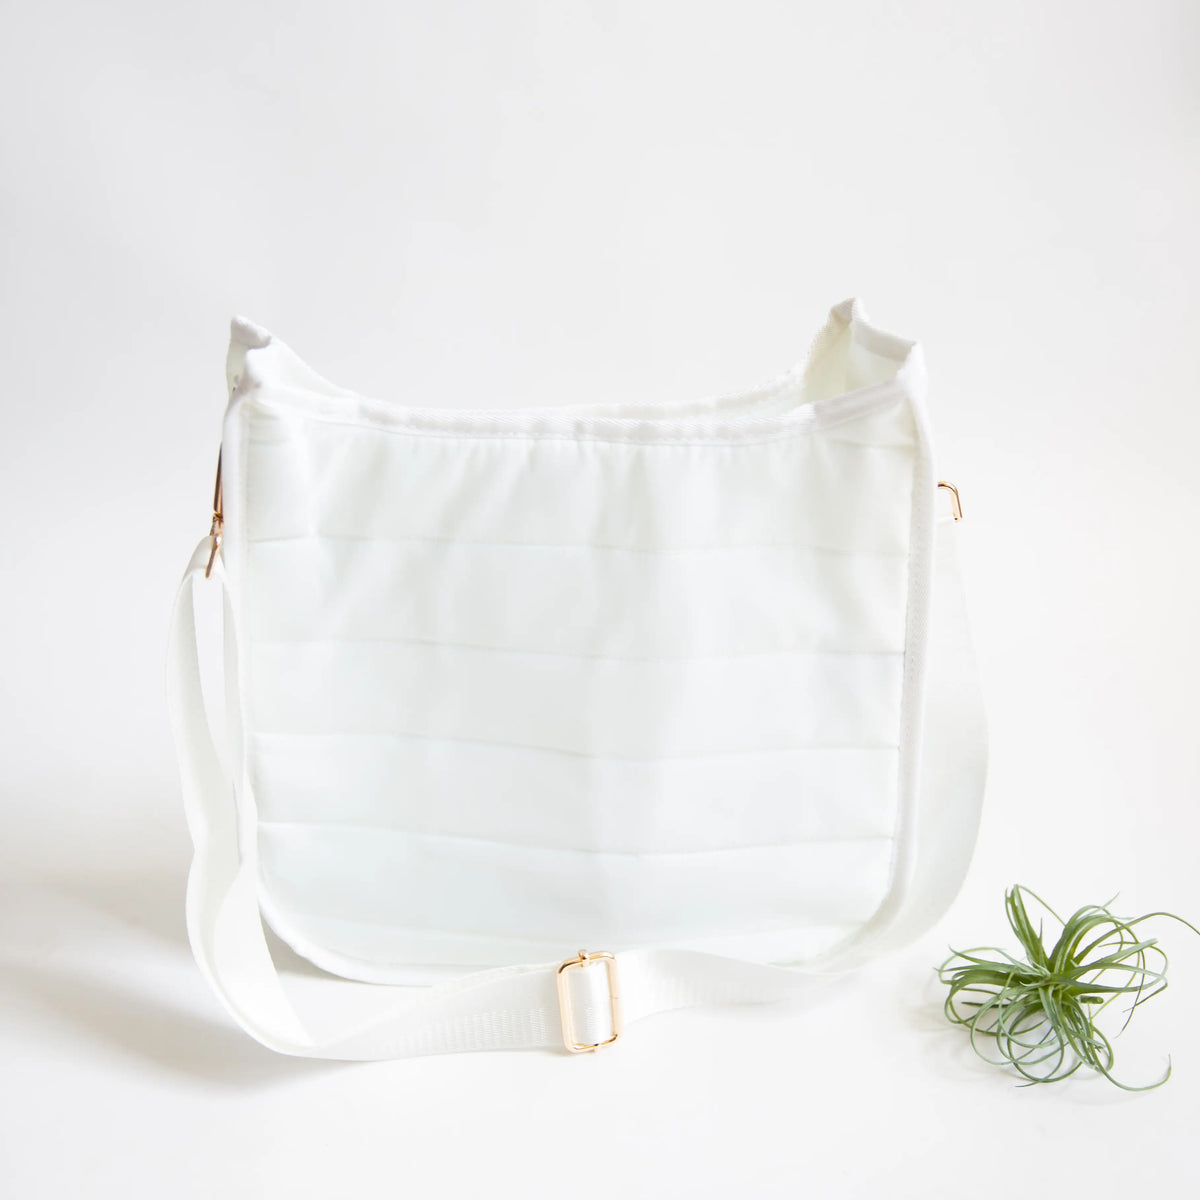 Nylon Cross Body Bag - 4 Colors to Choose From!